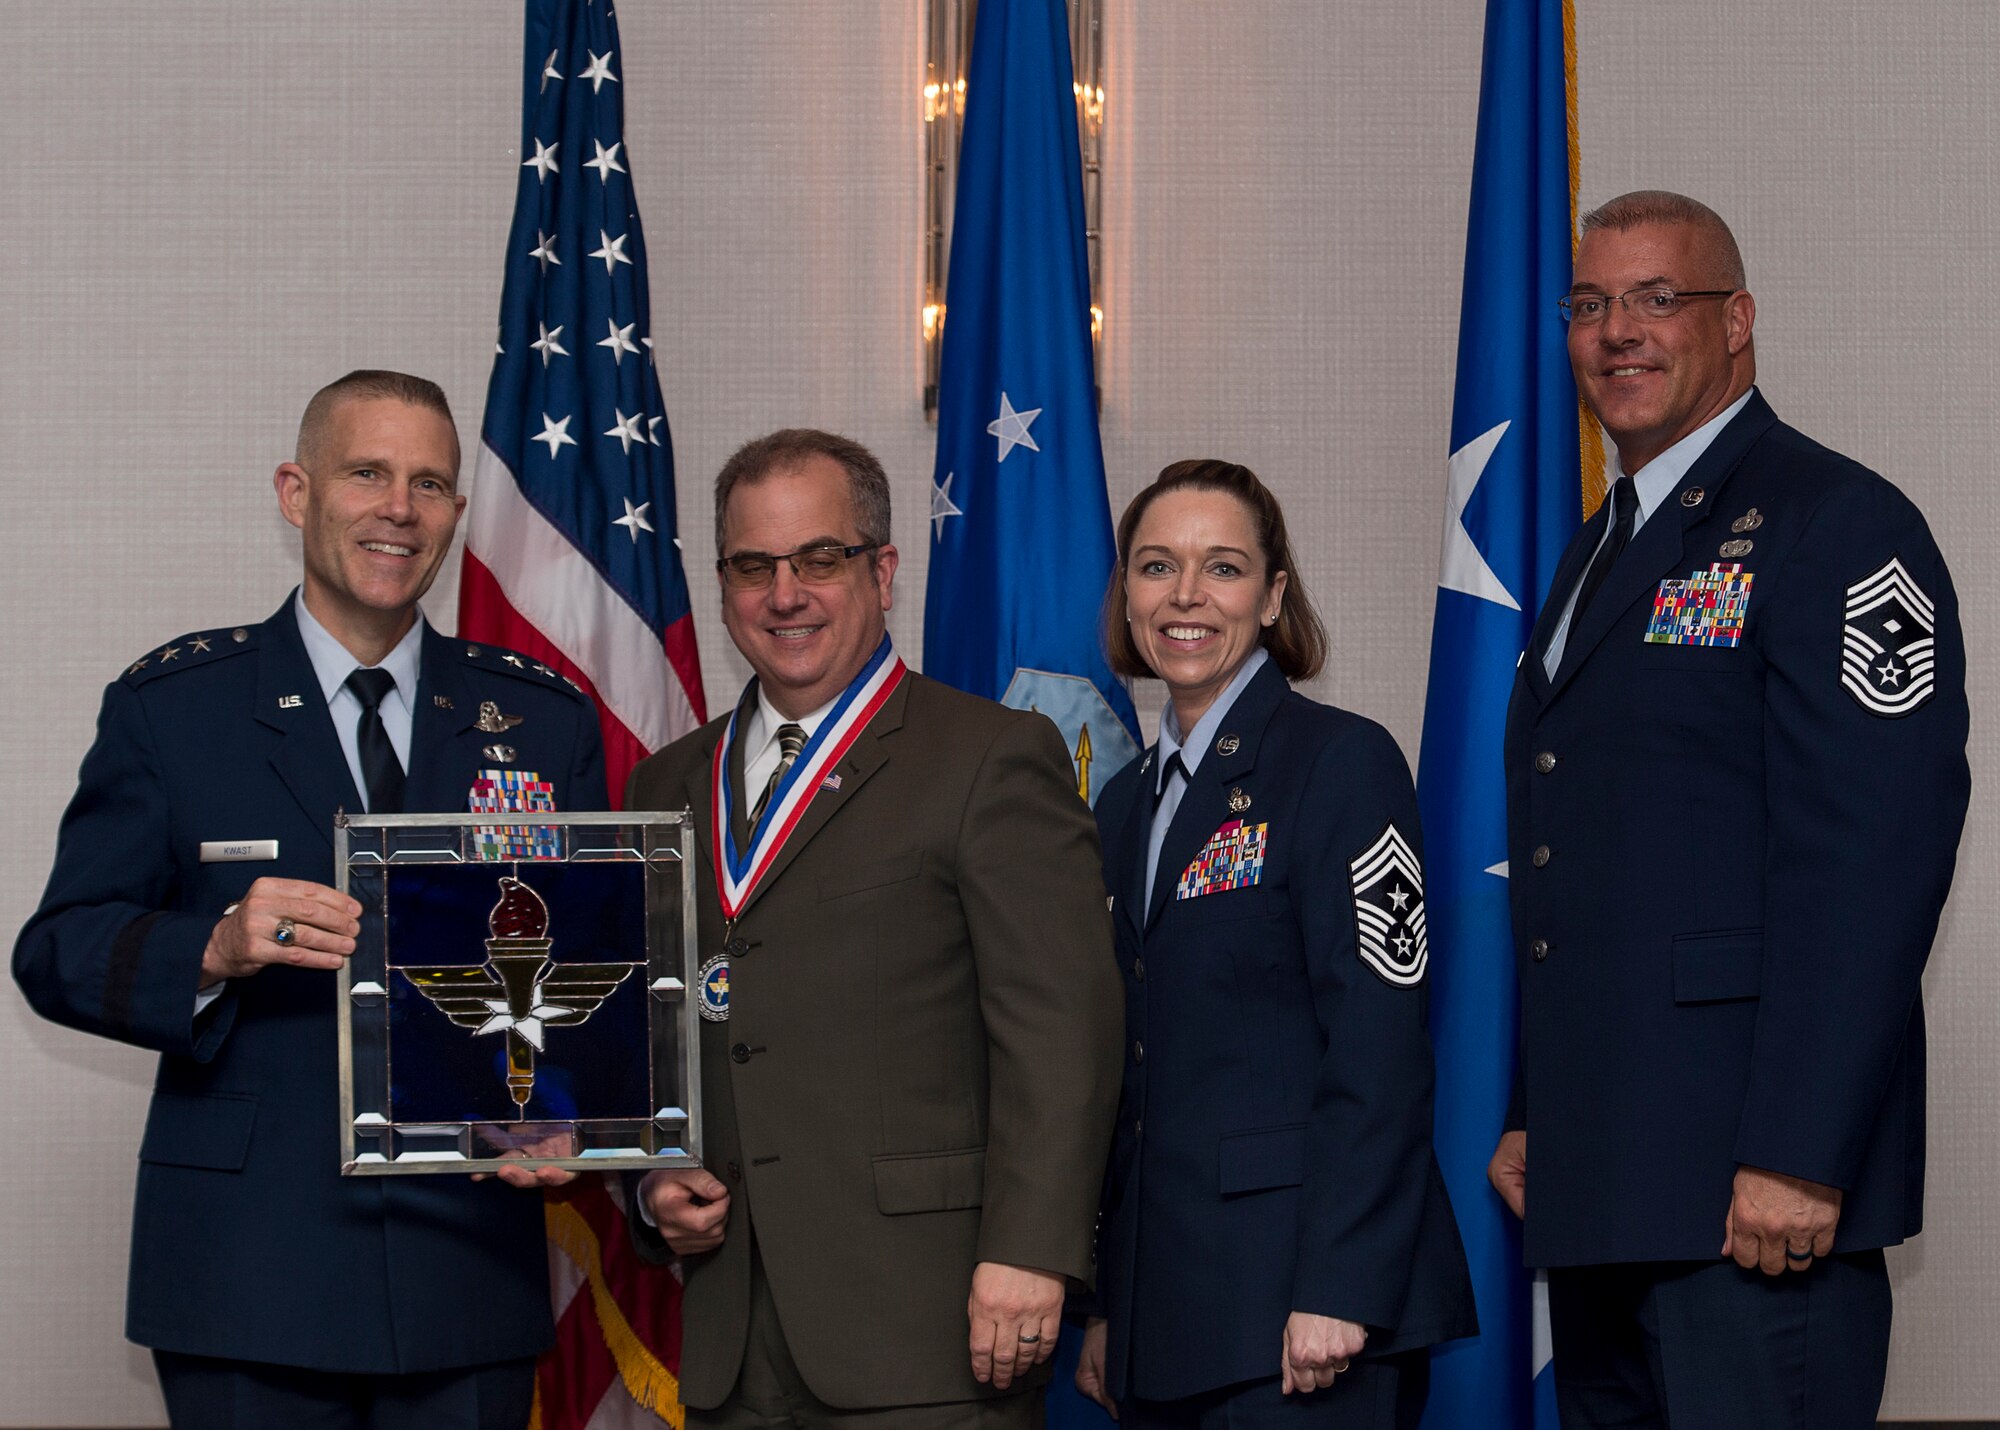 Joseph M. DiMisa, Instructor of Environmental Management at the Air Force Institute of Technology at Wright-Patterson Air Force Base, Ohio, receives the 2017 Non-supervisory Civilian of the Year Award from Lt. Gen. Steve Kwast, Commander of AETC, during the AETC 12 Outstanding Airmen of the Year Awards banquet Feb. 22, 2018 in Orlando, Fla. DiMisa directed eight AFIT Civil Engineering courses, while teaching 130 instructional hours in 25 courses, educating 783 Department of Defense engineers, developed seven Air Force level on-demand environmental management mini-courses, which are used 8,000 times per month and saved the Air Force $400,000 annually, as well as authored and published “Ecological Restoration of the Midwest” a 296 page book and a first of its kind for the Midwest. (U.S. Air Force photo by Staff Sgt. Kenneth W. Norman)